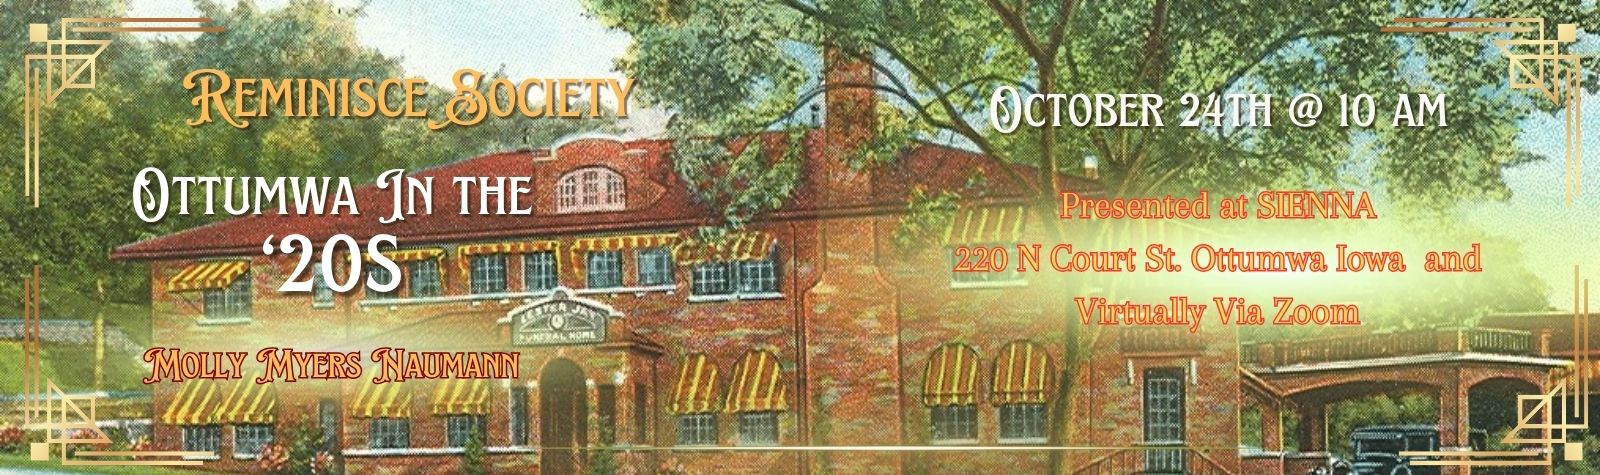 Reminisce Society: “Ottumwa in the 20s” presented by Molly Myers Naumann